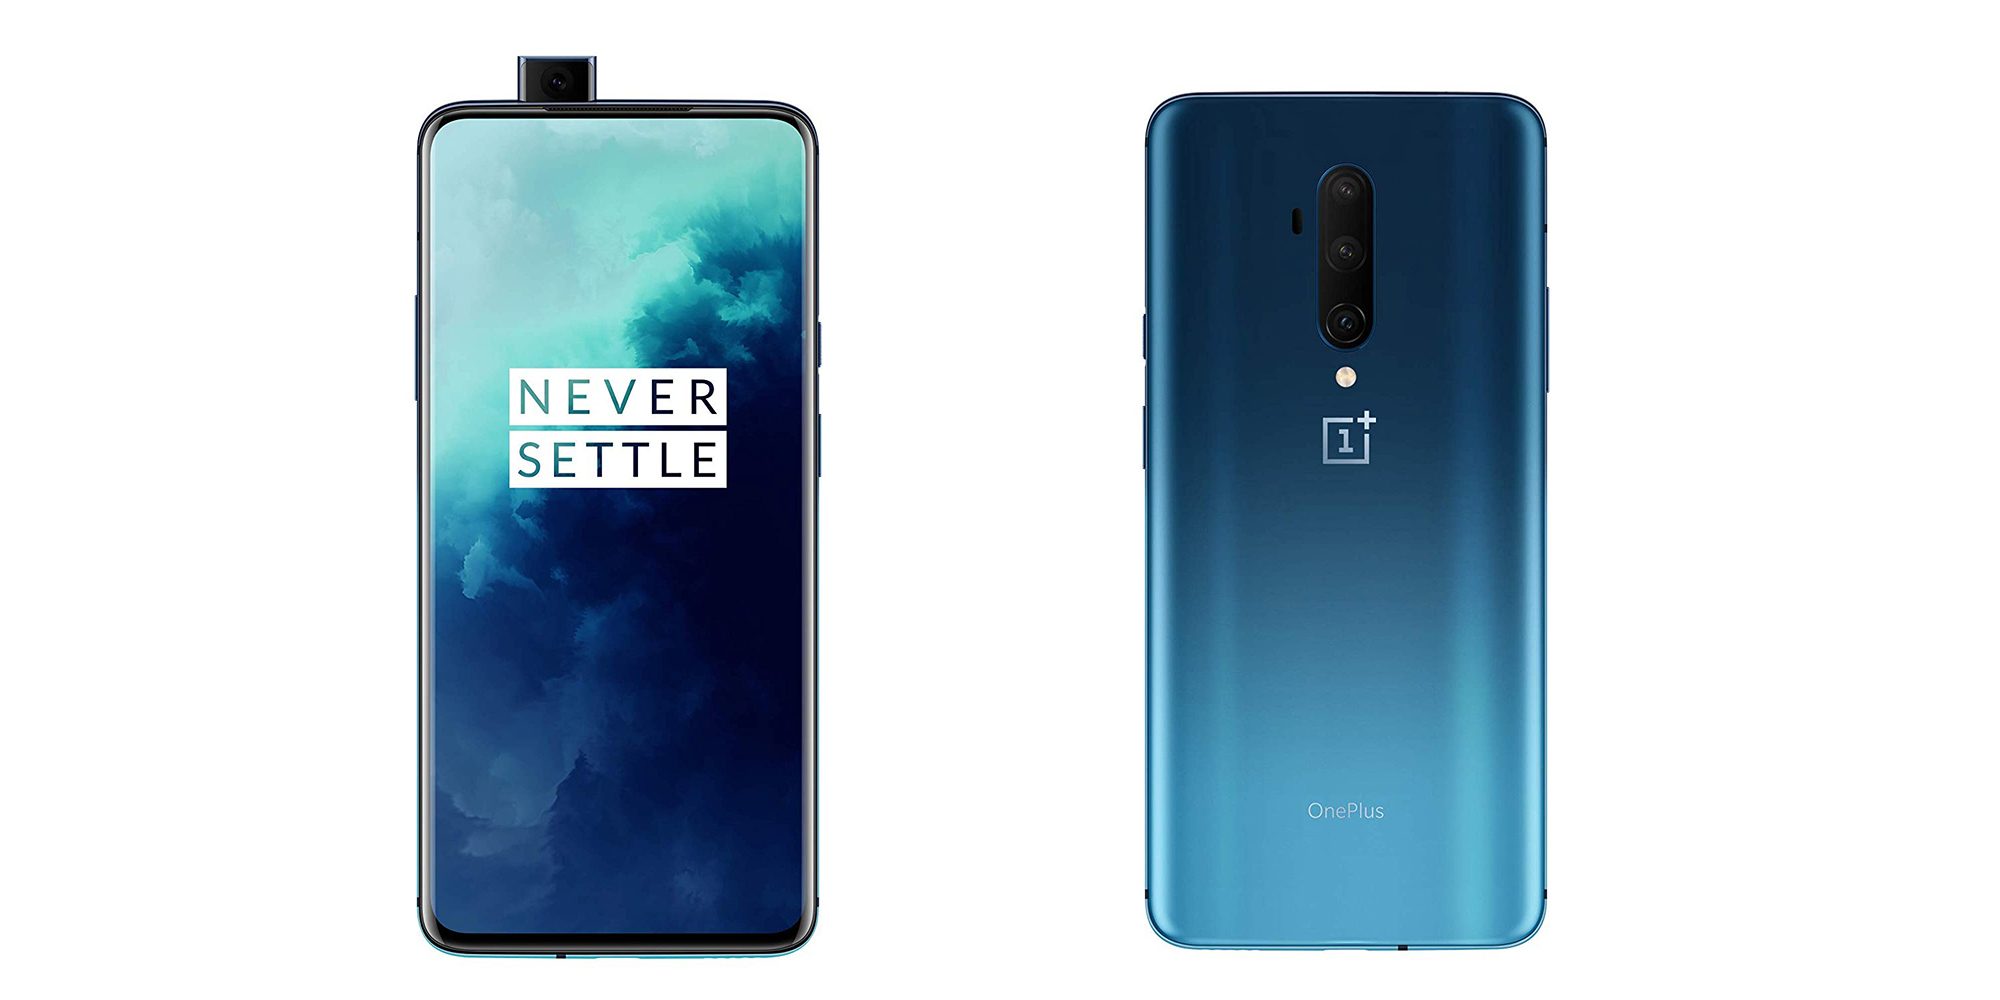 O OnePlus 7T Pro é oficial com Snapdragon 855+, Warp Charge 30T, 8GB RAM